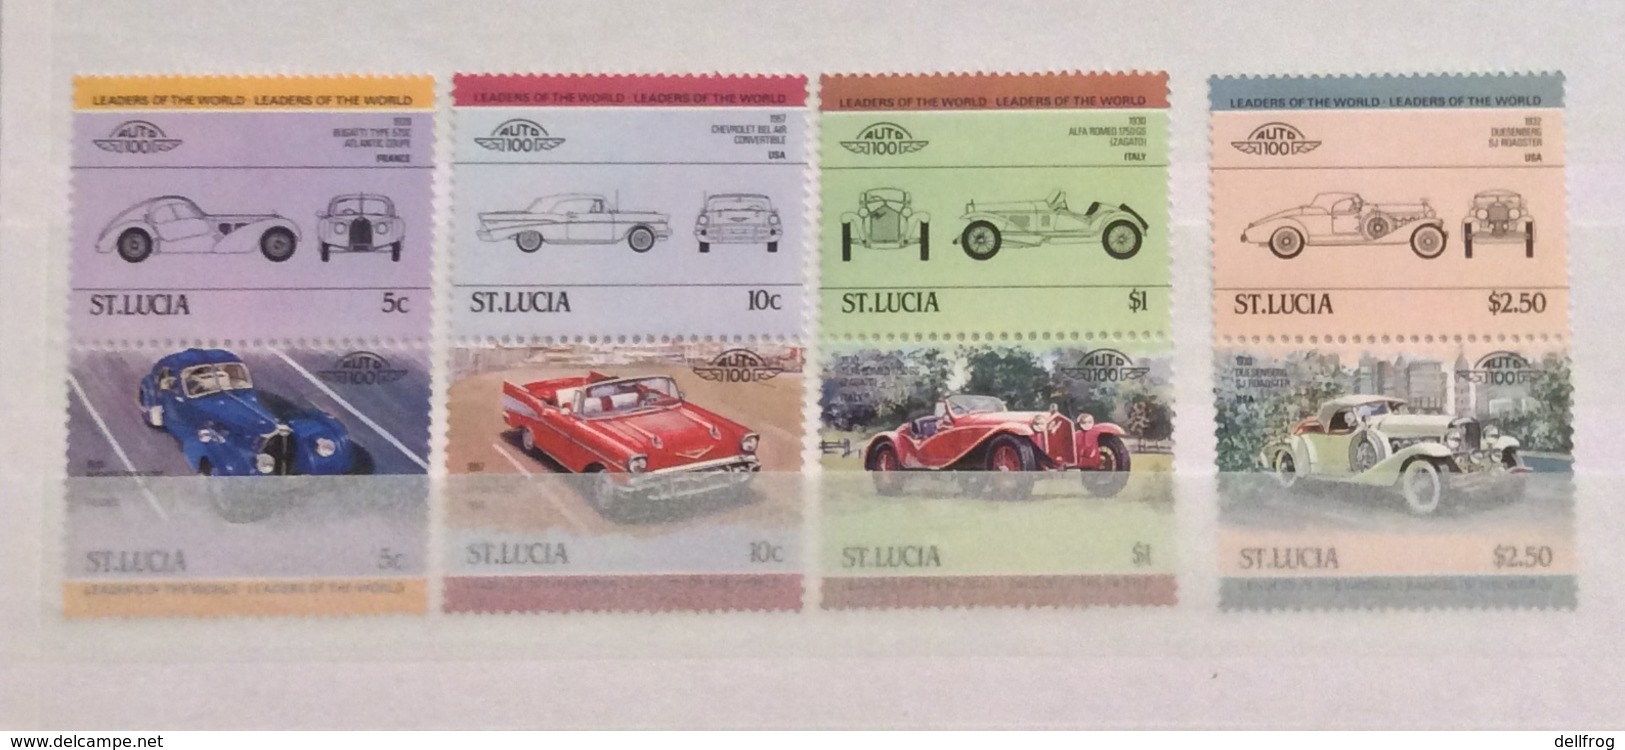 St. Lucia 1984 Leaders Of The World Automobiles 1st Series Set MNH - St.Lucia (1979-...)